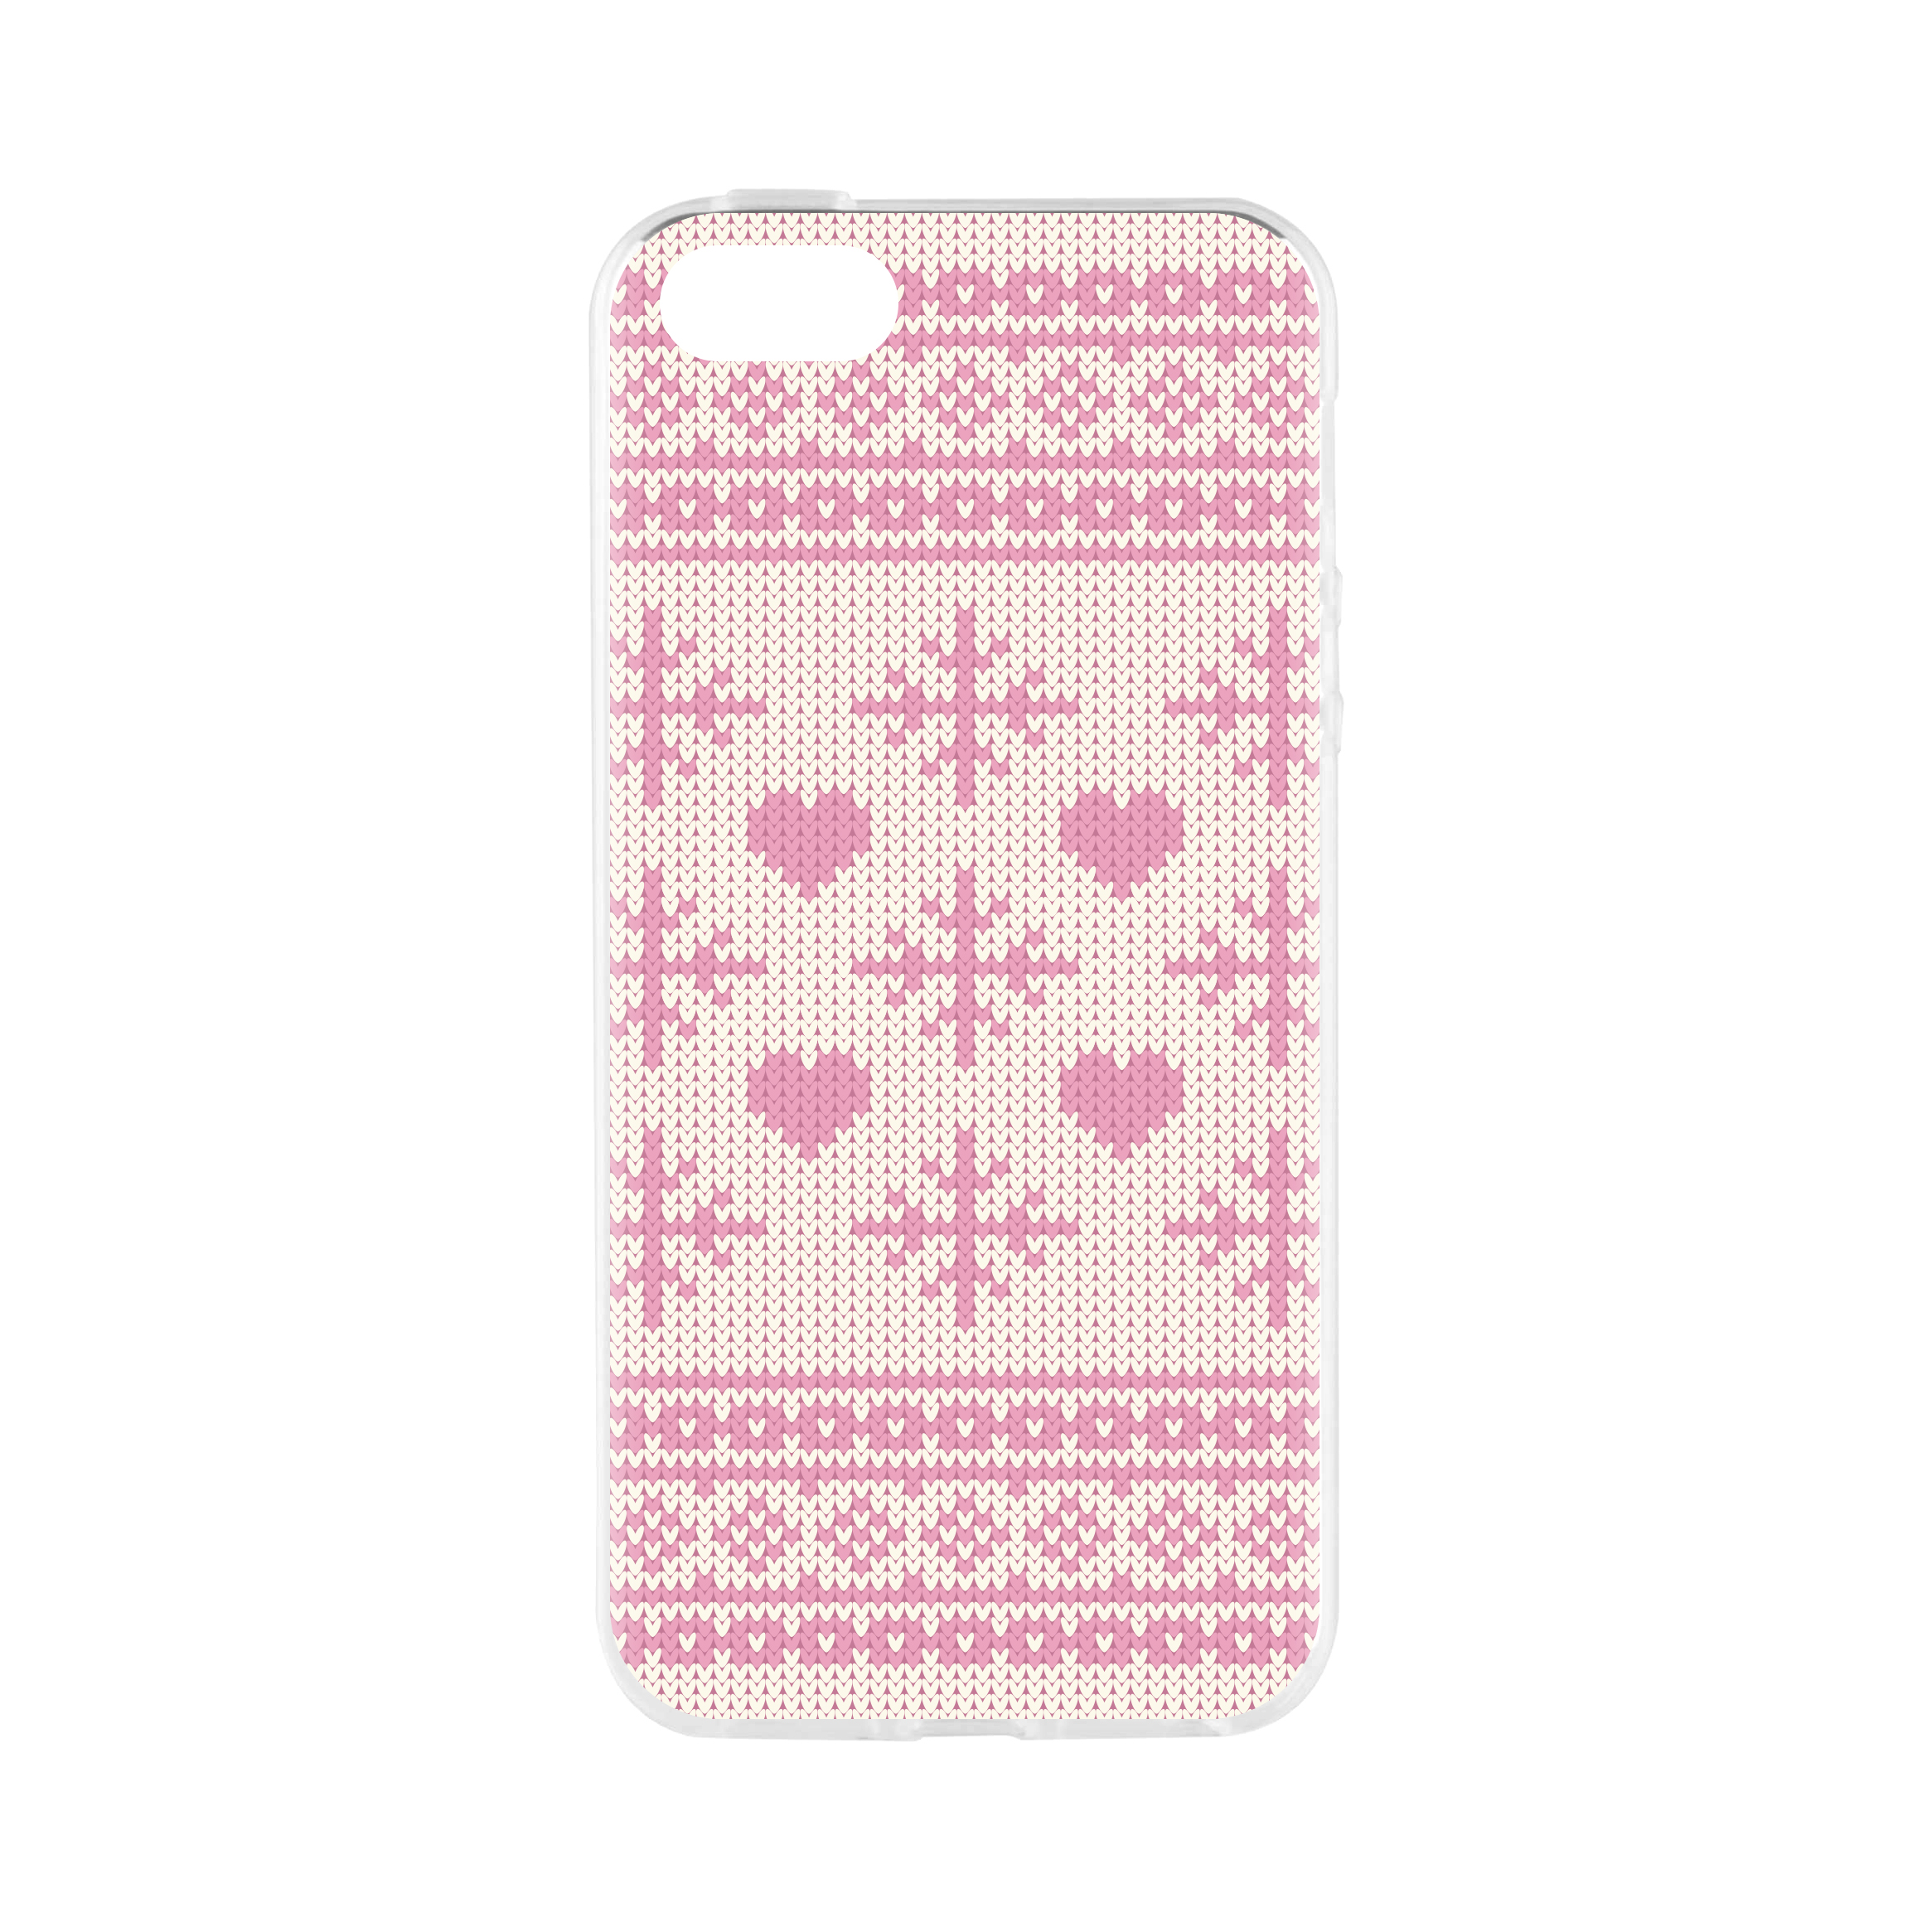 5/5S/SE, APPLE, PINK Xmas Backcover, Sweater, FLAVR IPHONE Ugly Cardcase